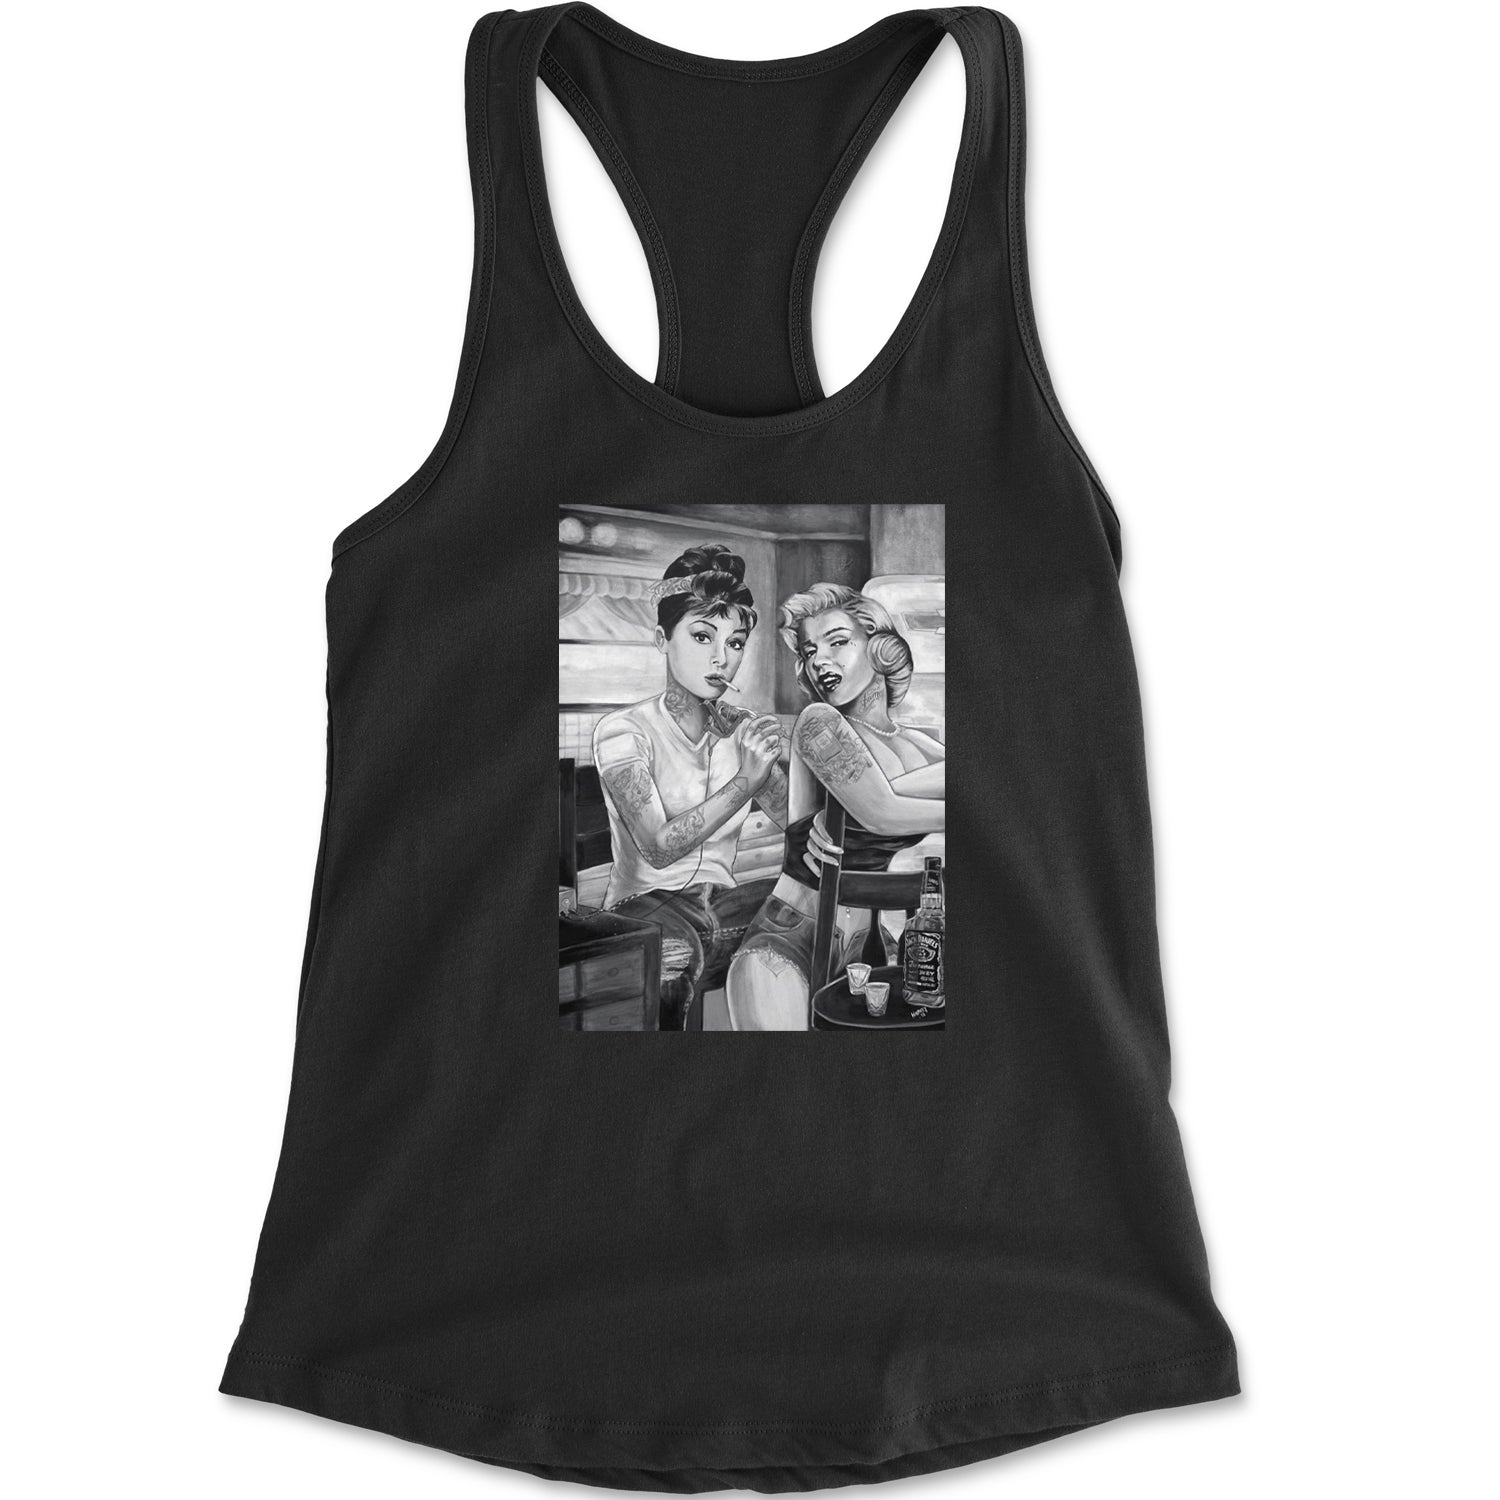 Marilyn Monroe and Audrey Hepburn Tattooed Icons Racerback Tank Top for Women